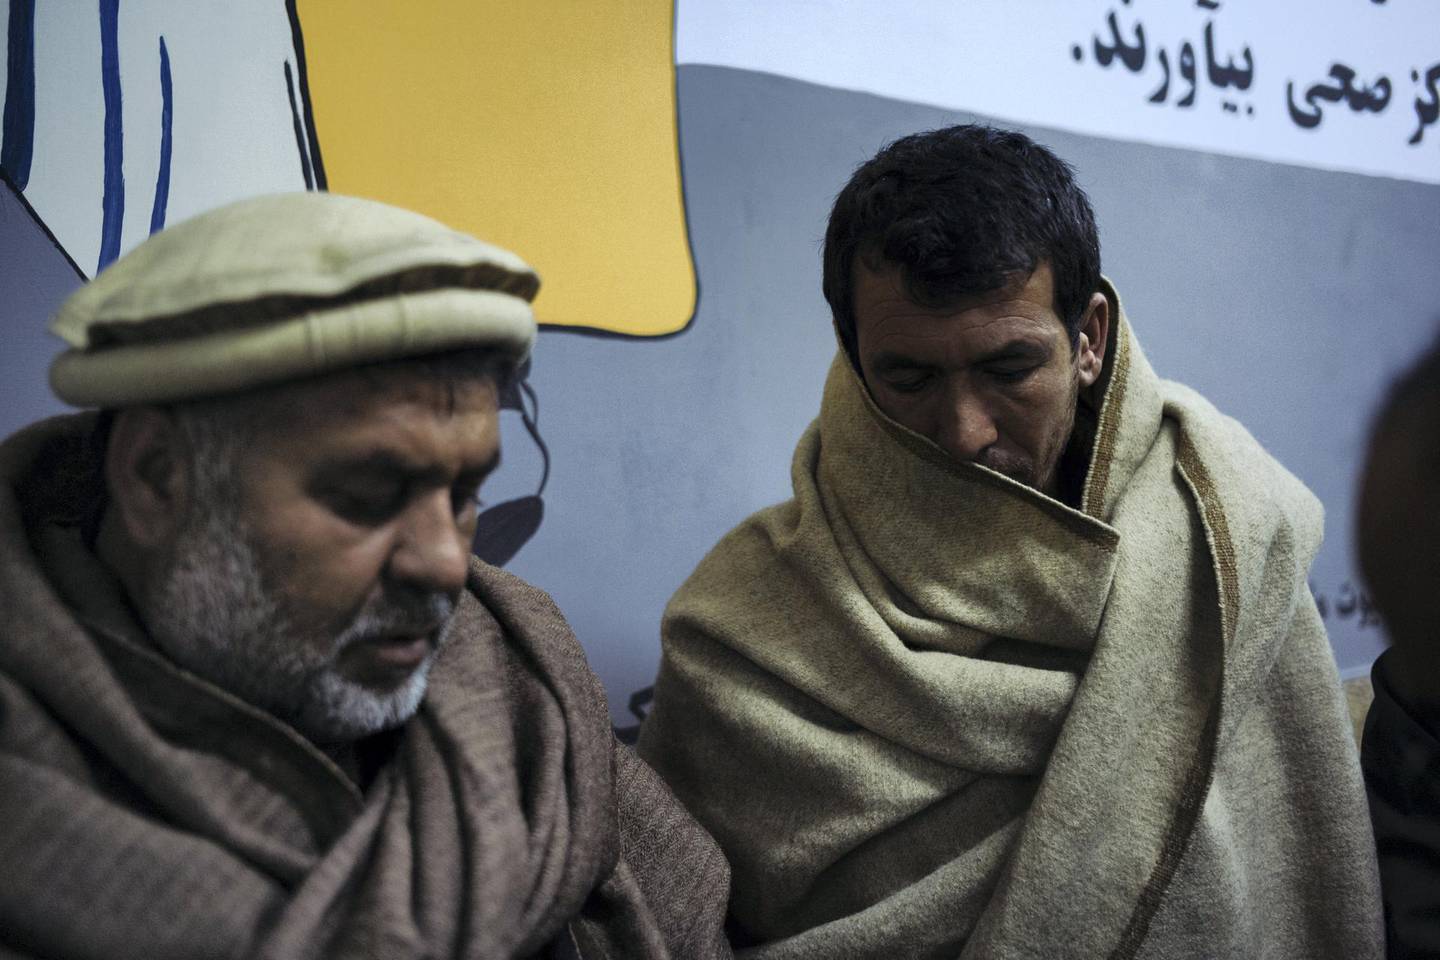 January 15th, 2019 - Kabul, Kabul, Afghanistan: Tooryalai's uncle, Noorallen, and brother, Baryalai, stand outside of the ICU in the Wazir Akbar Khan public hospital in Kabul. Tooryalai was wounded in an explosion while out getting bread for dinner.The attack on the Green Village, a compound in Kabul that houses foreign workers and NGO's, initially killed 9 and wounded over 120 Afghans who lived in the vicinity. There was also extensive property damage to the surrounding homes and shops. Ivan Flores/The National